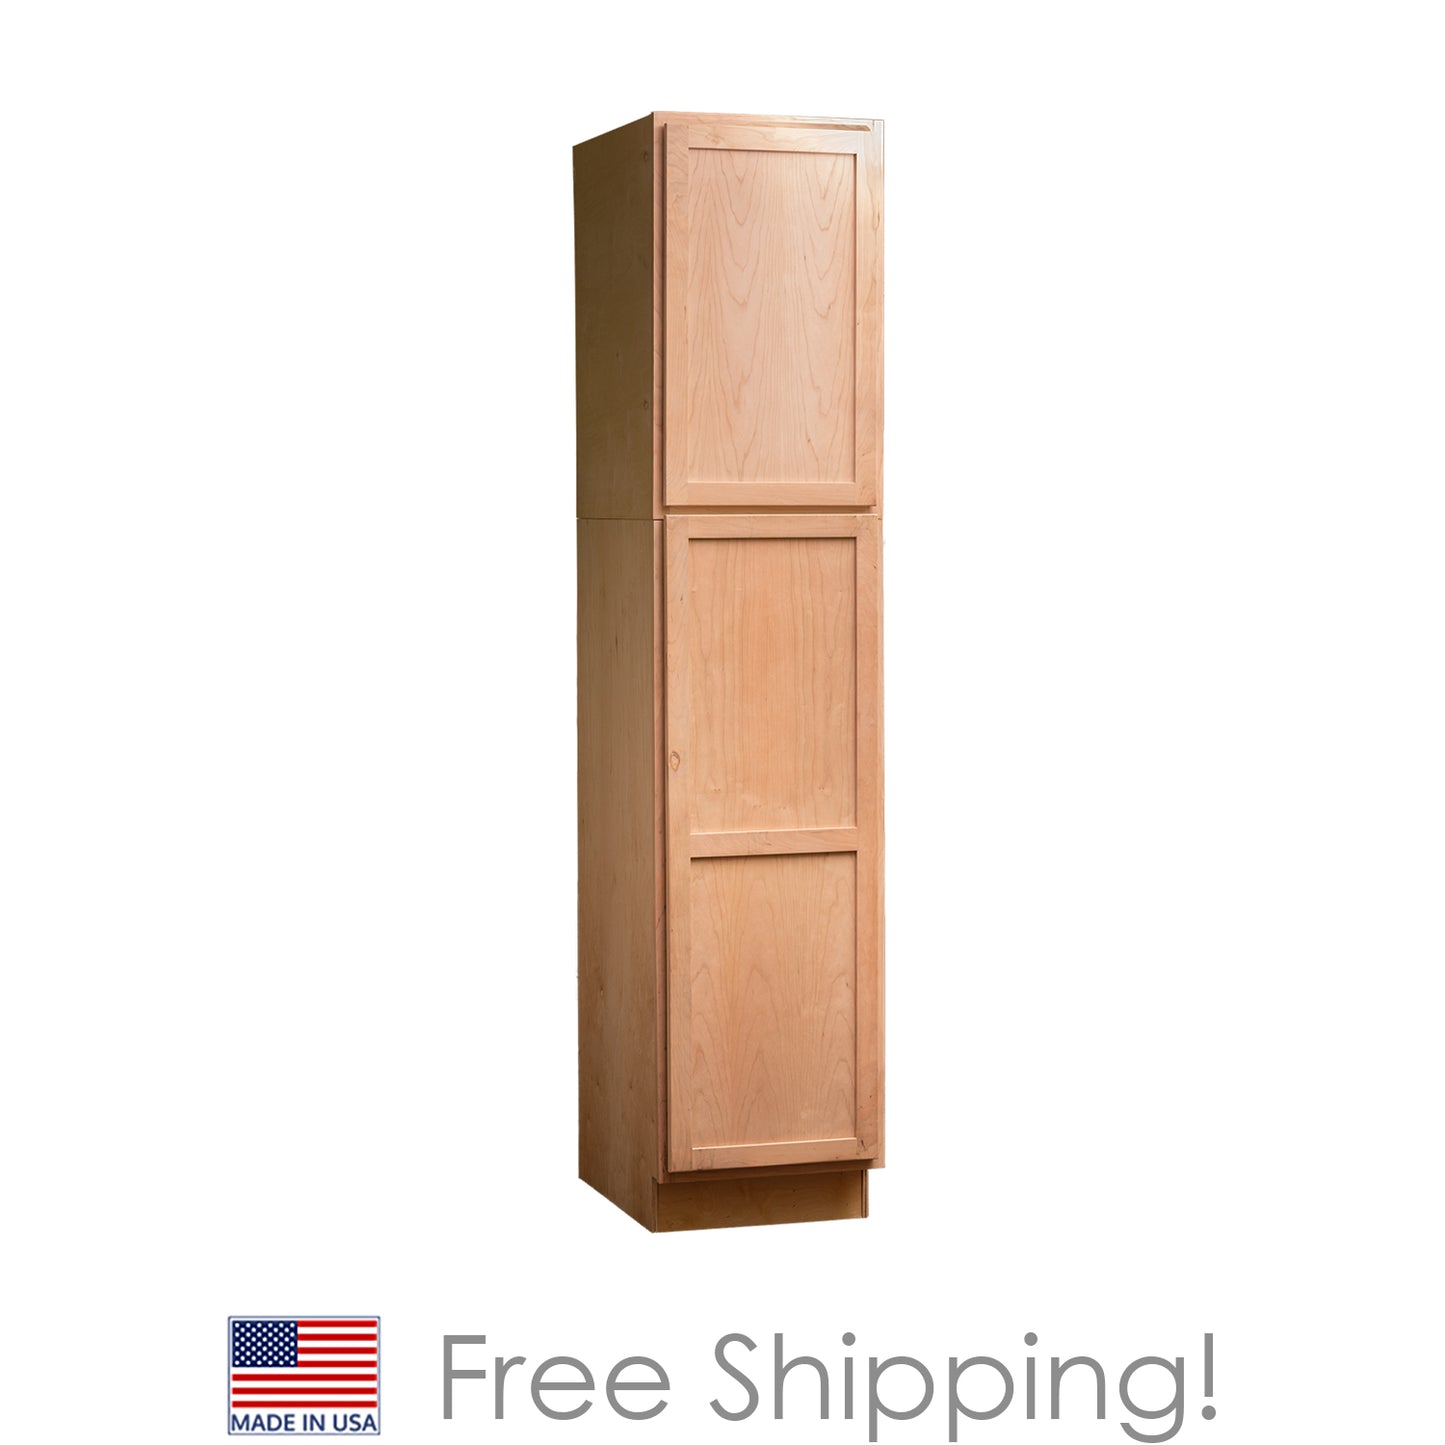 Quicklock RTA (Ready-to-Assemble) Raw Cherry Pantry Cabinet- 18" Wide